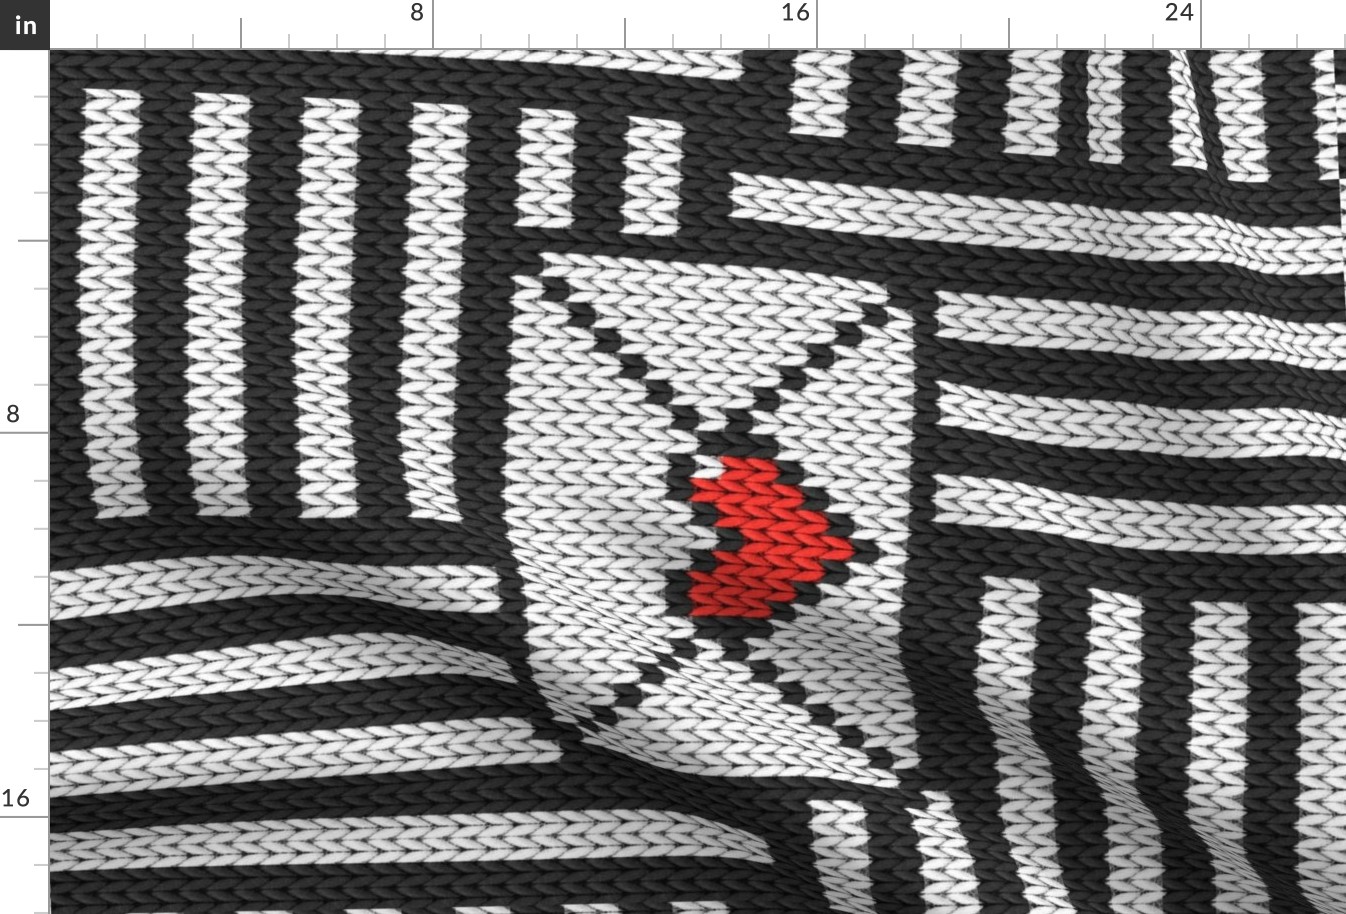 Knitted heart letter black white stripes Wall Hanging